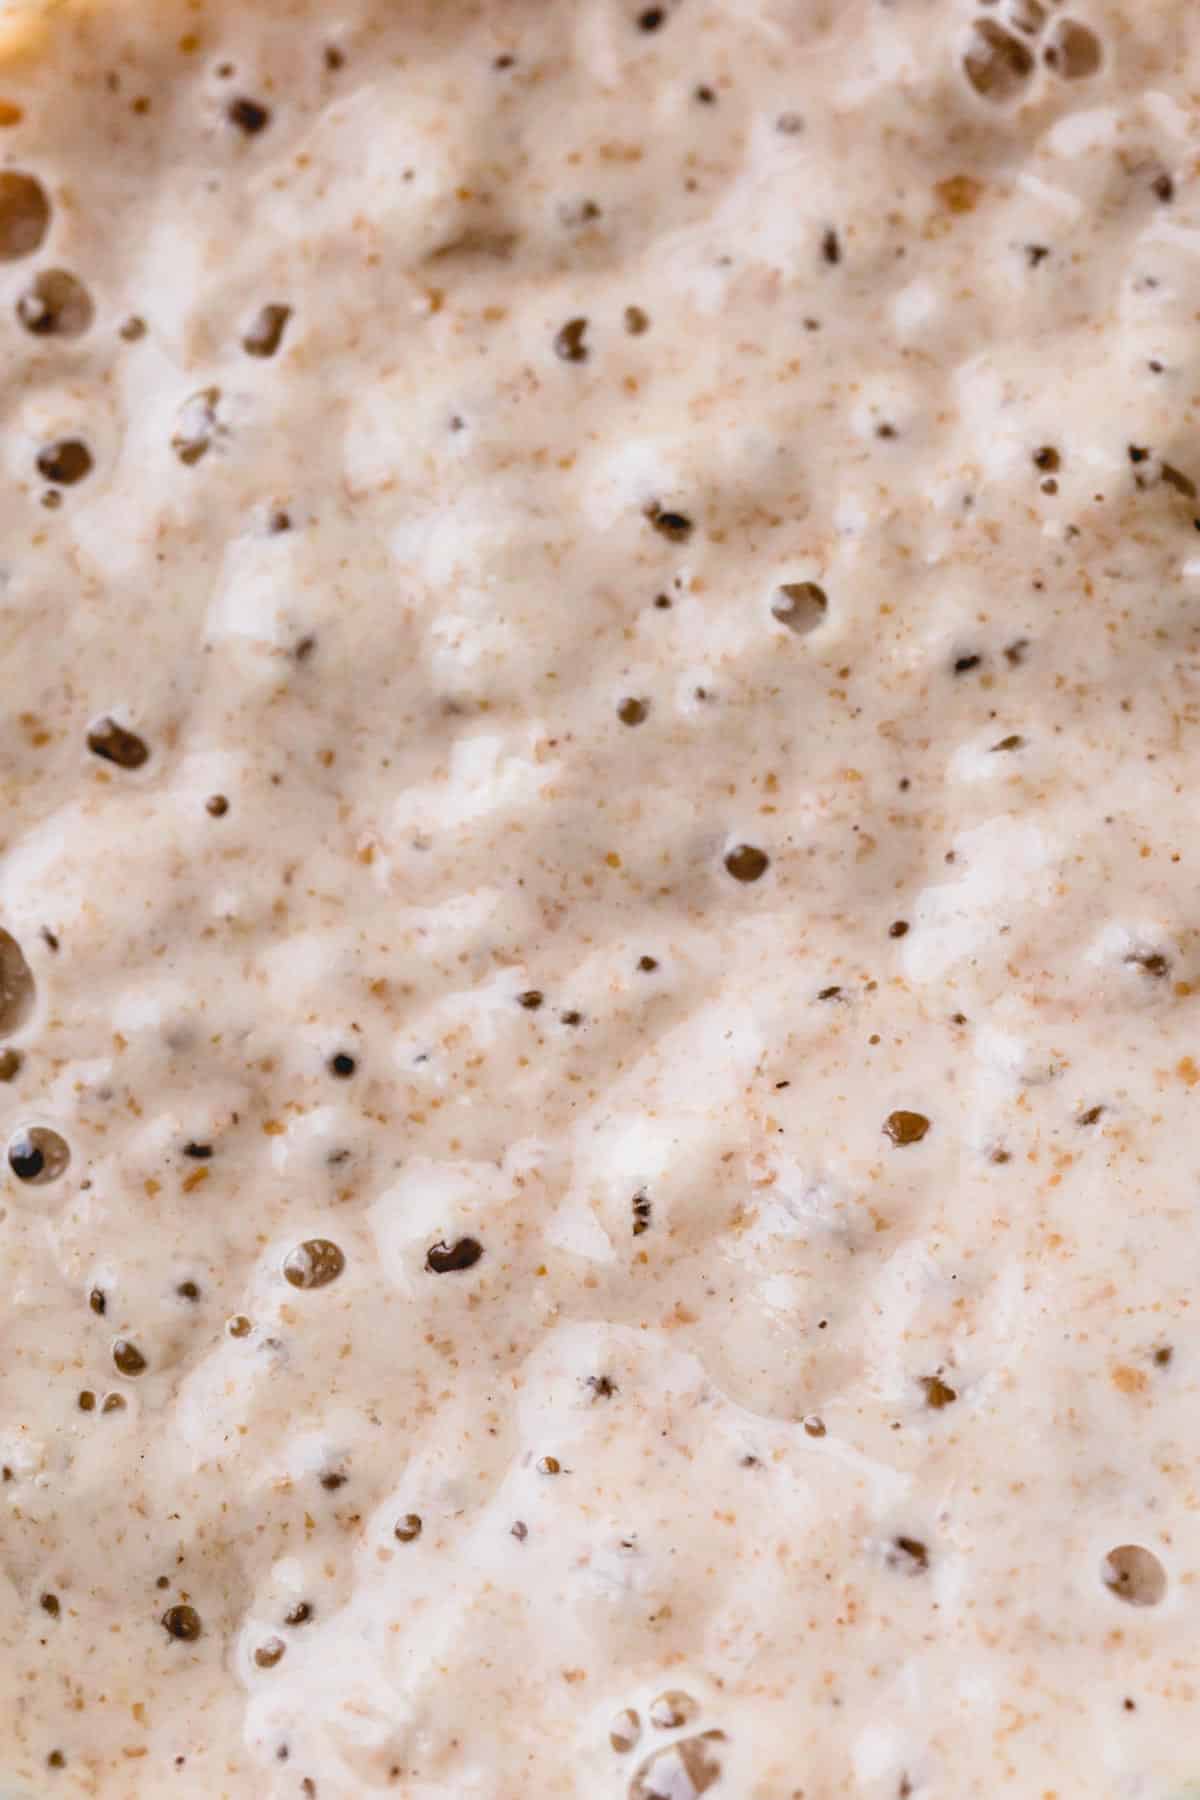 Upclose look of bubbly sourdough starter.